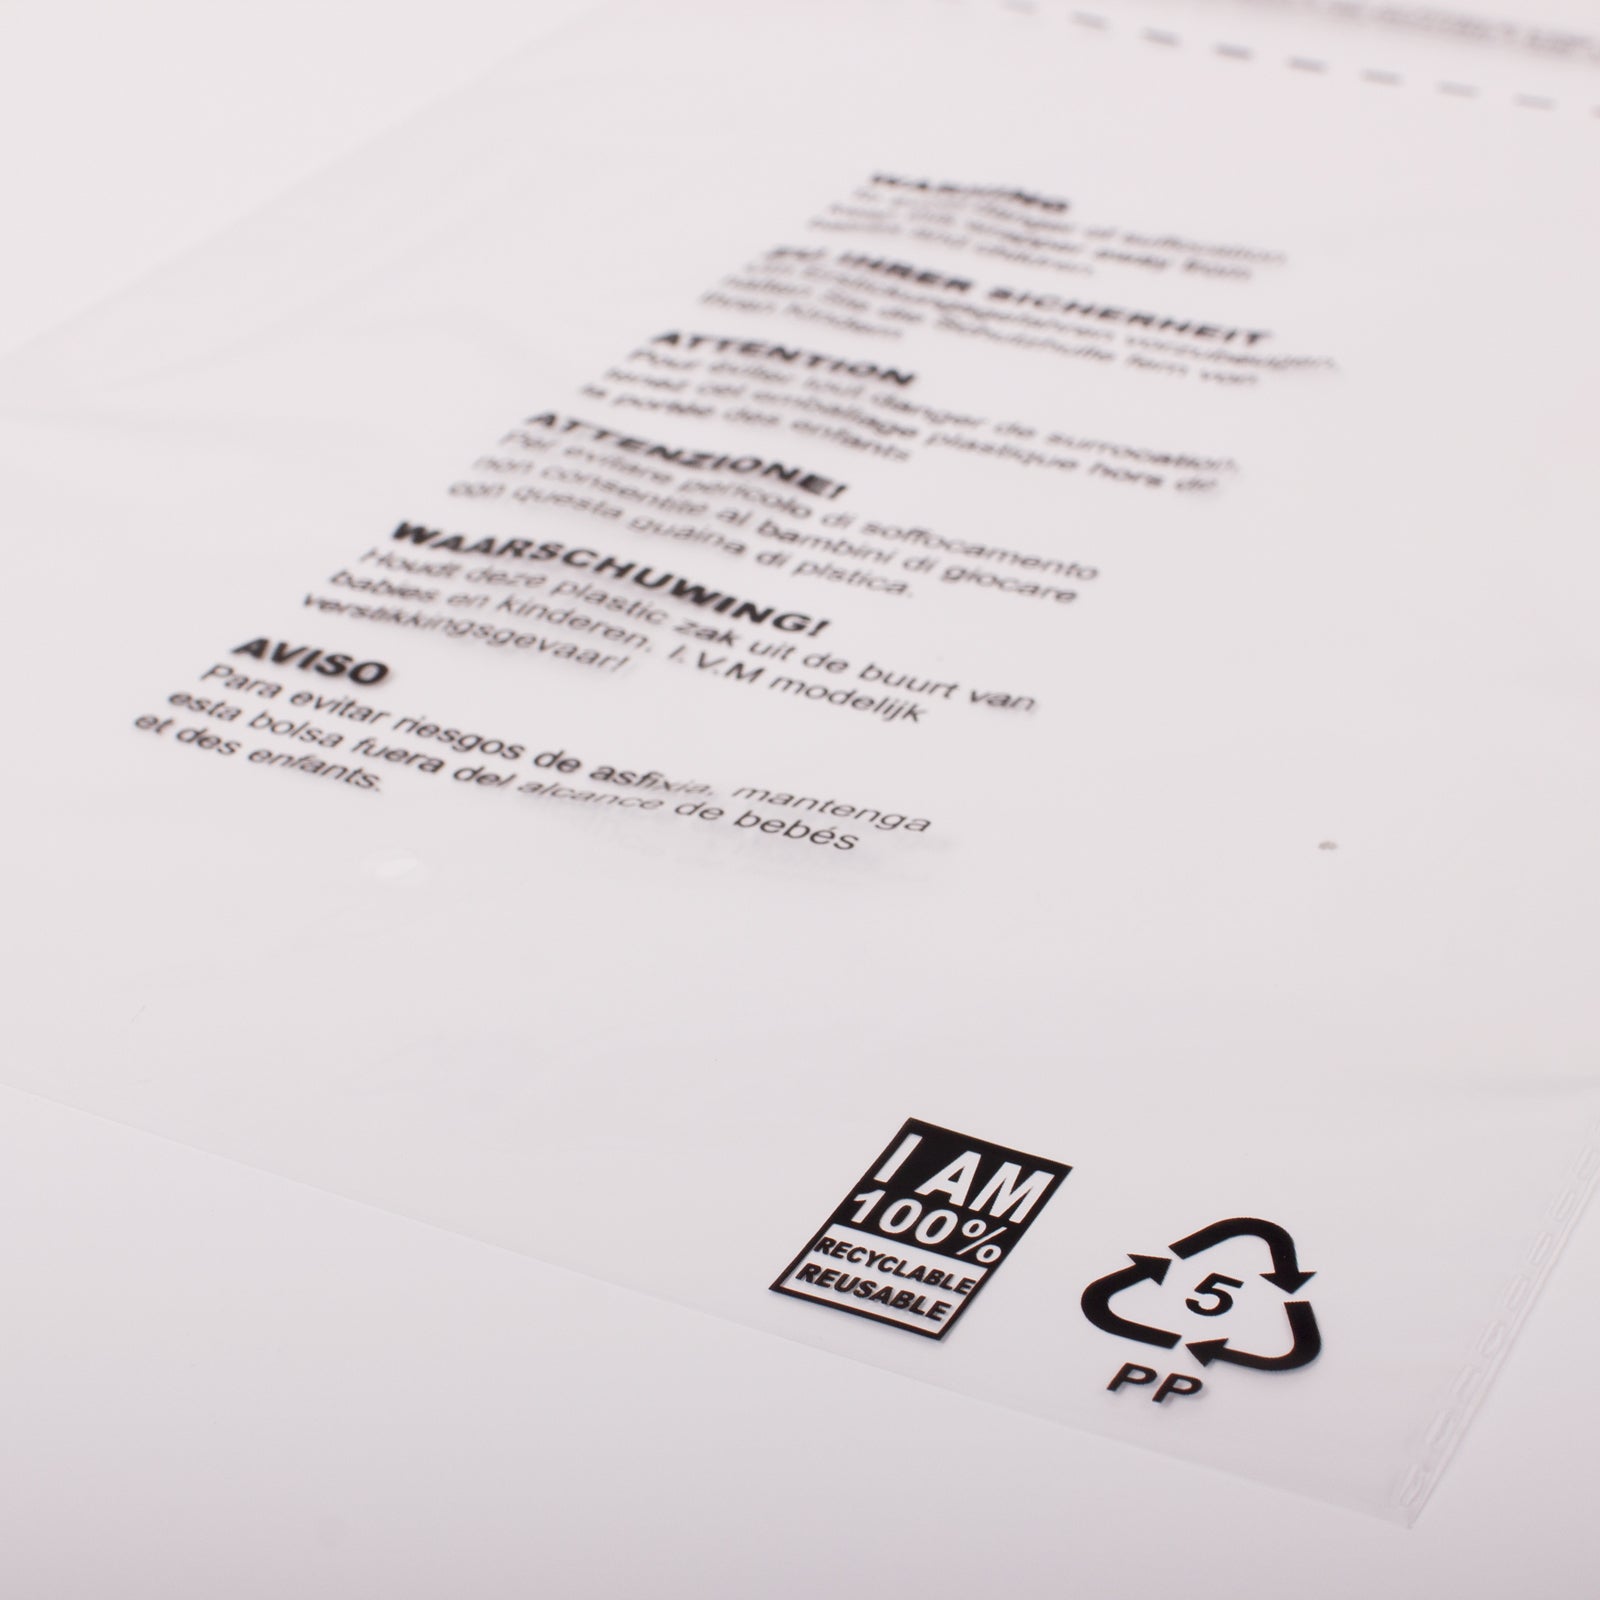 12 x 15 Clear Mailing Bag with 'I AM 100% RECYCLABLE'